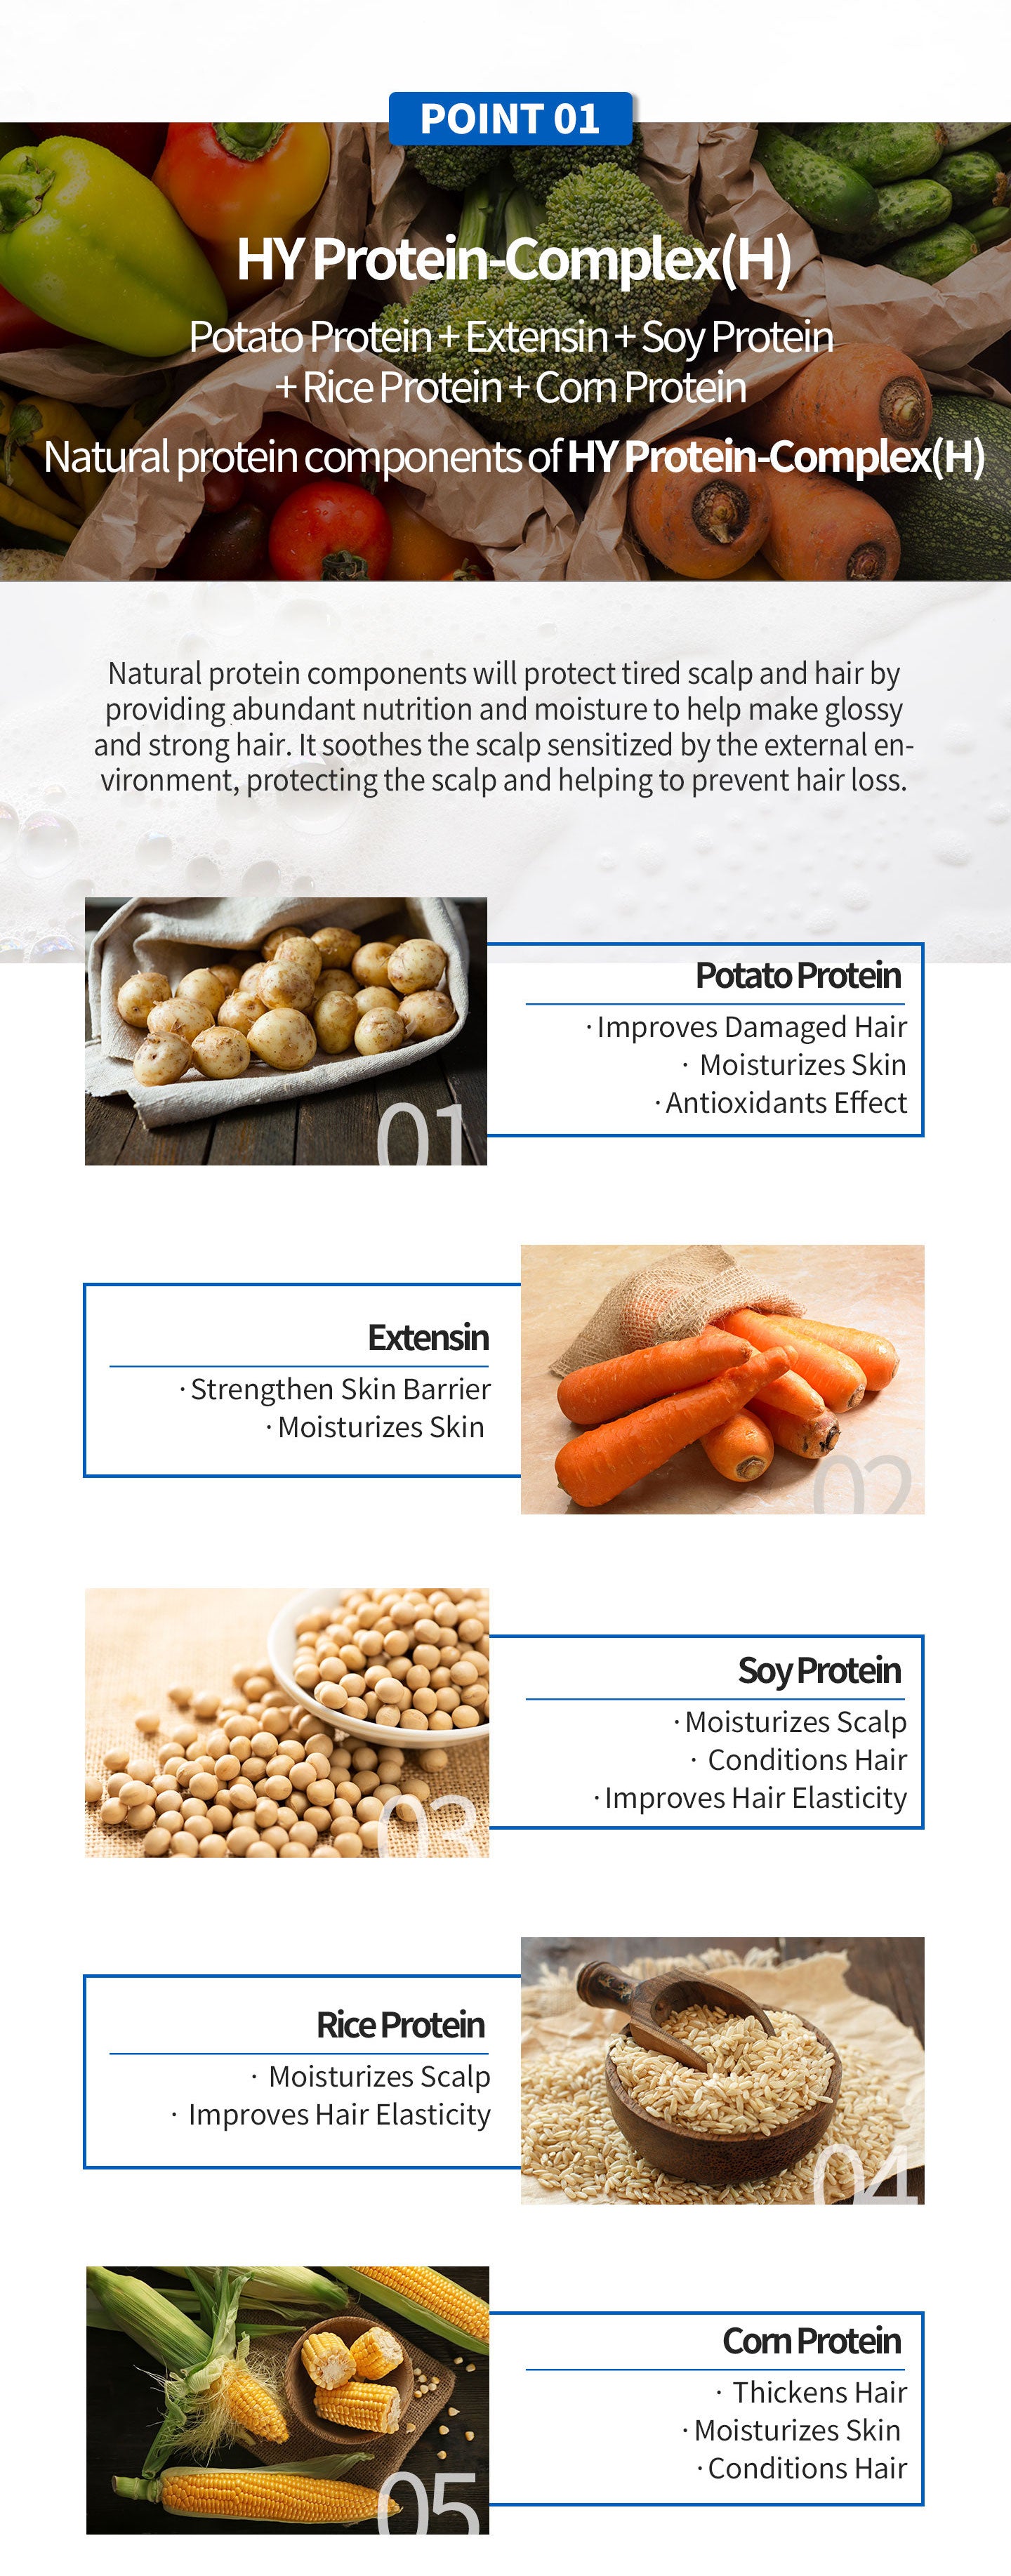 Potato protein + extensin + soy protein + rice protein + corn protein. Natural protein components of HY Protein-complex. Natural protein components will protect tired scalp and hair by providing abundant nutrition and moisture to help make glossy and stro